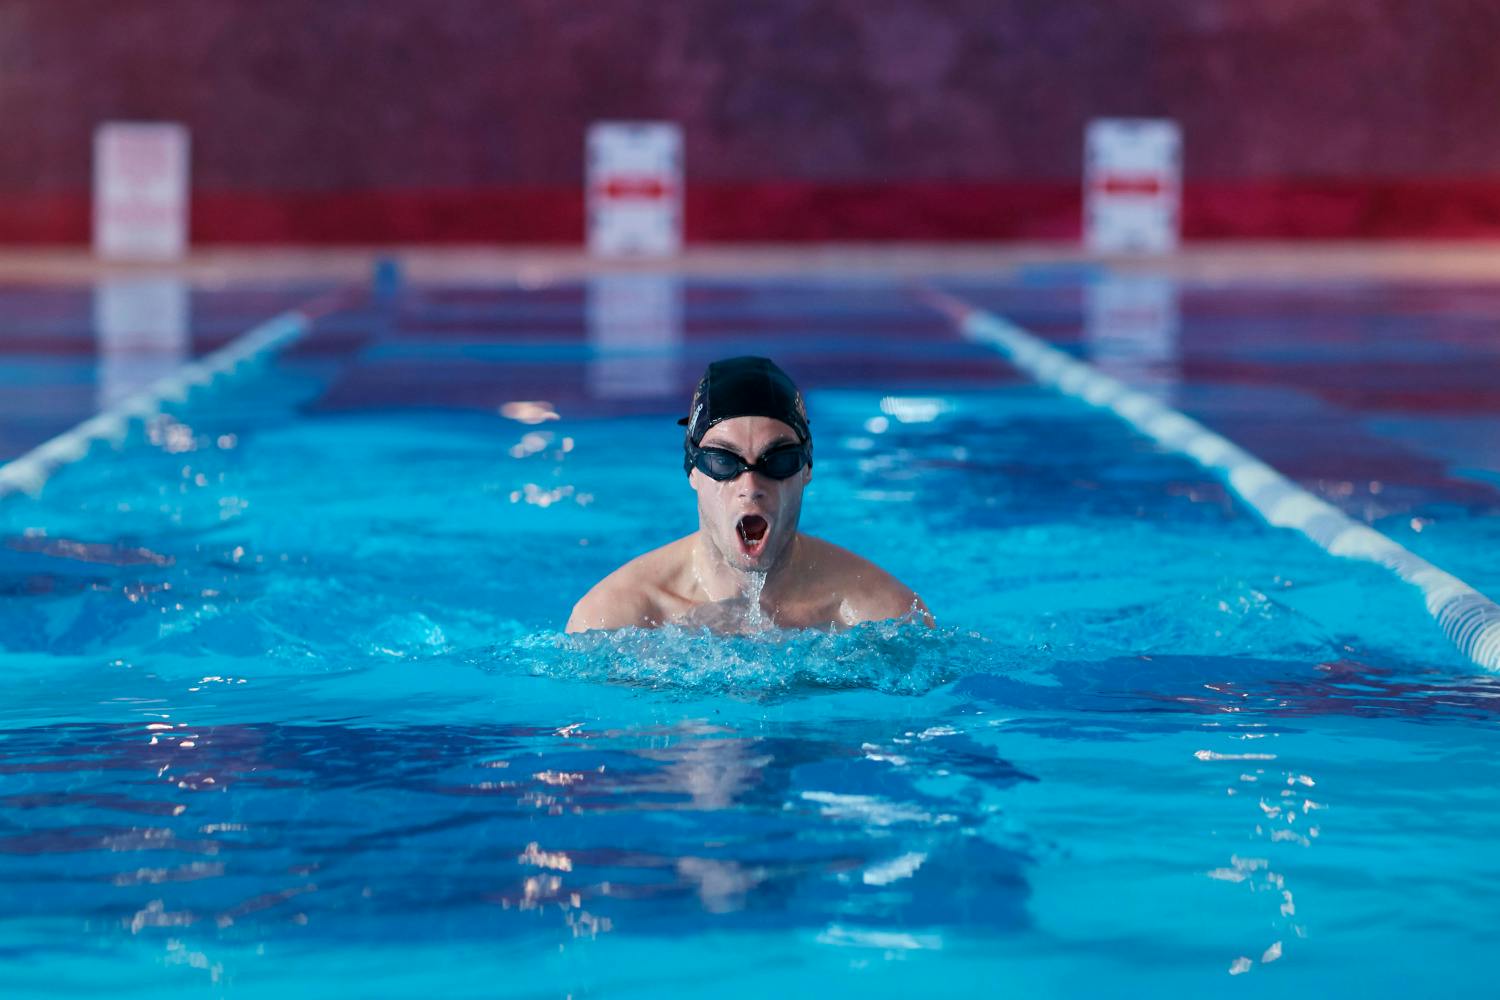 A man in a swimming cap and goggles swimming in a pool.